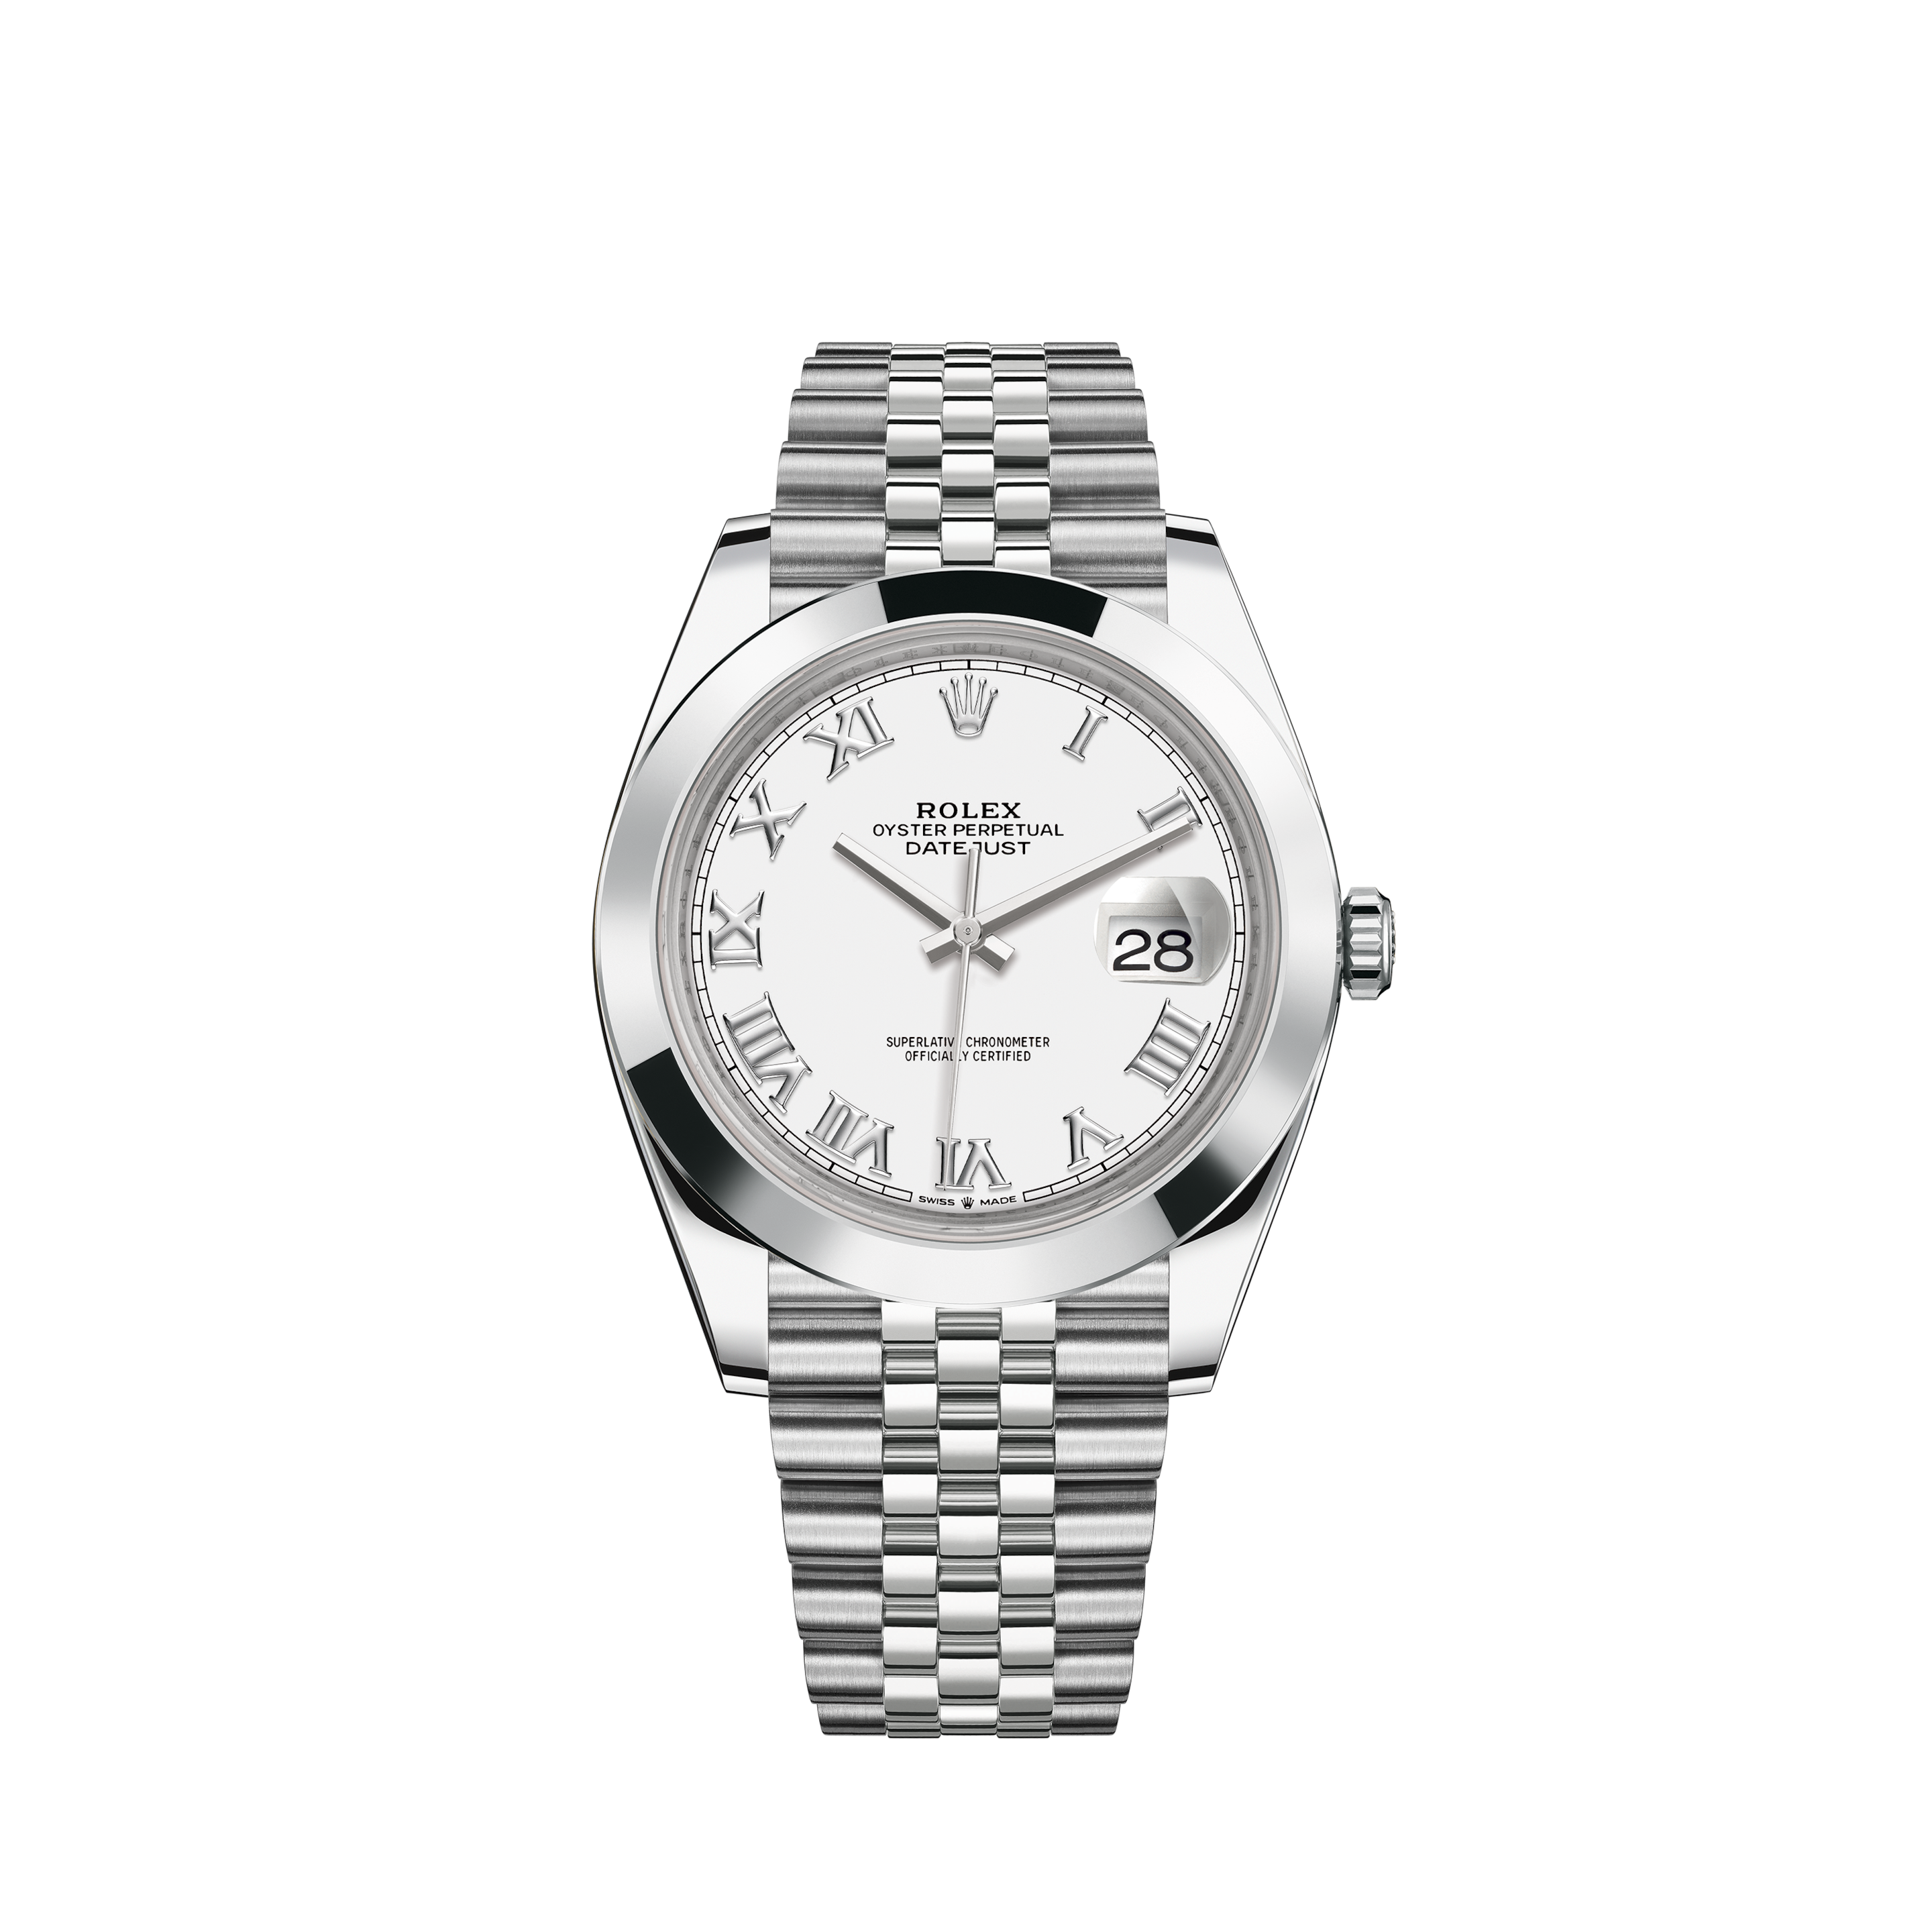 Rolex Women's New Style Two-Tone Datejust with Custom Black Diamond Dial and Bezel on Oyster Band